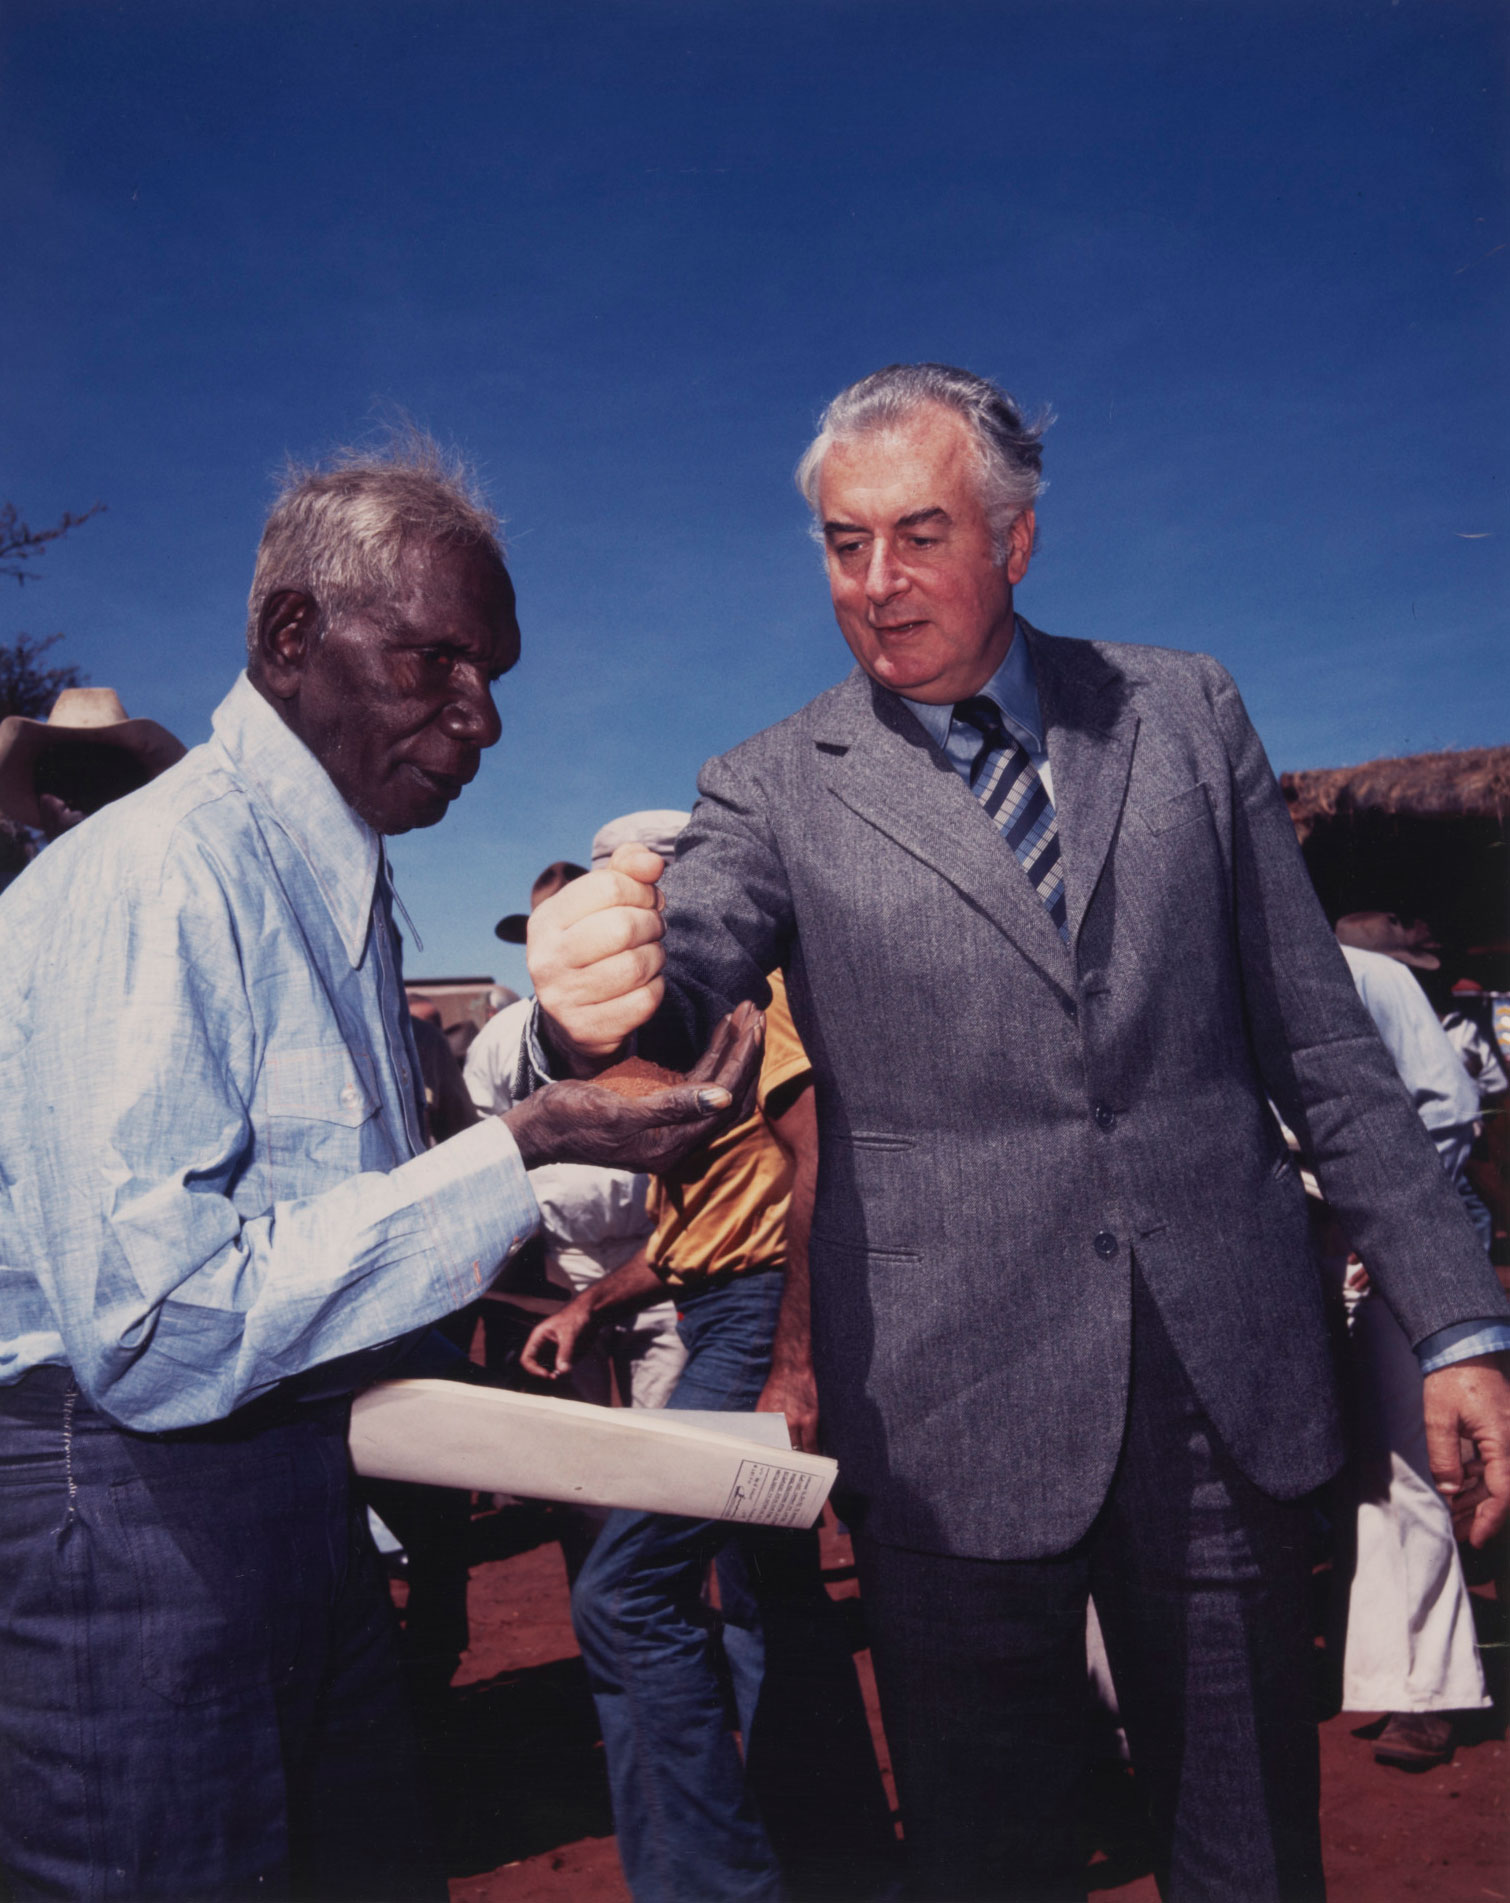 Gough Whitlam pouring a handful of red soil into the hands of Vincent Lingiari, by Mervyn Bishop, 1975.